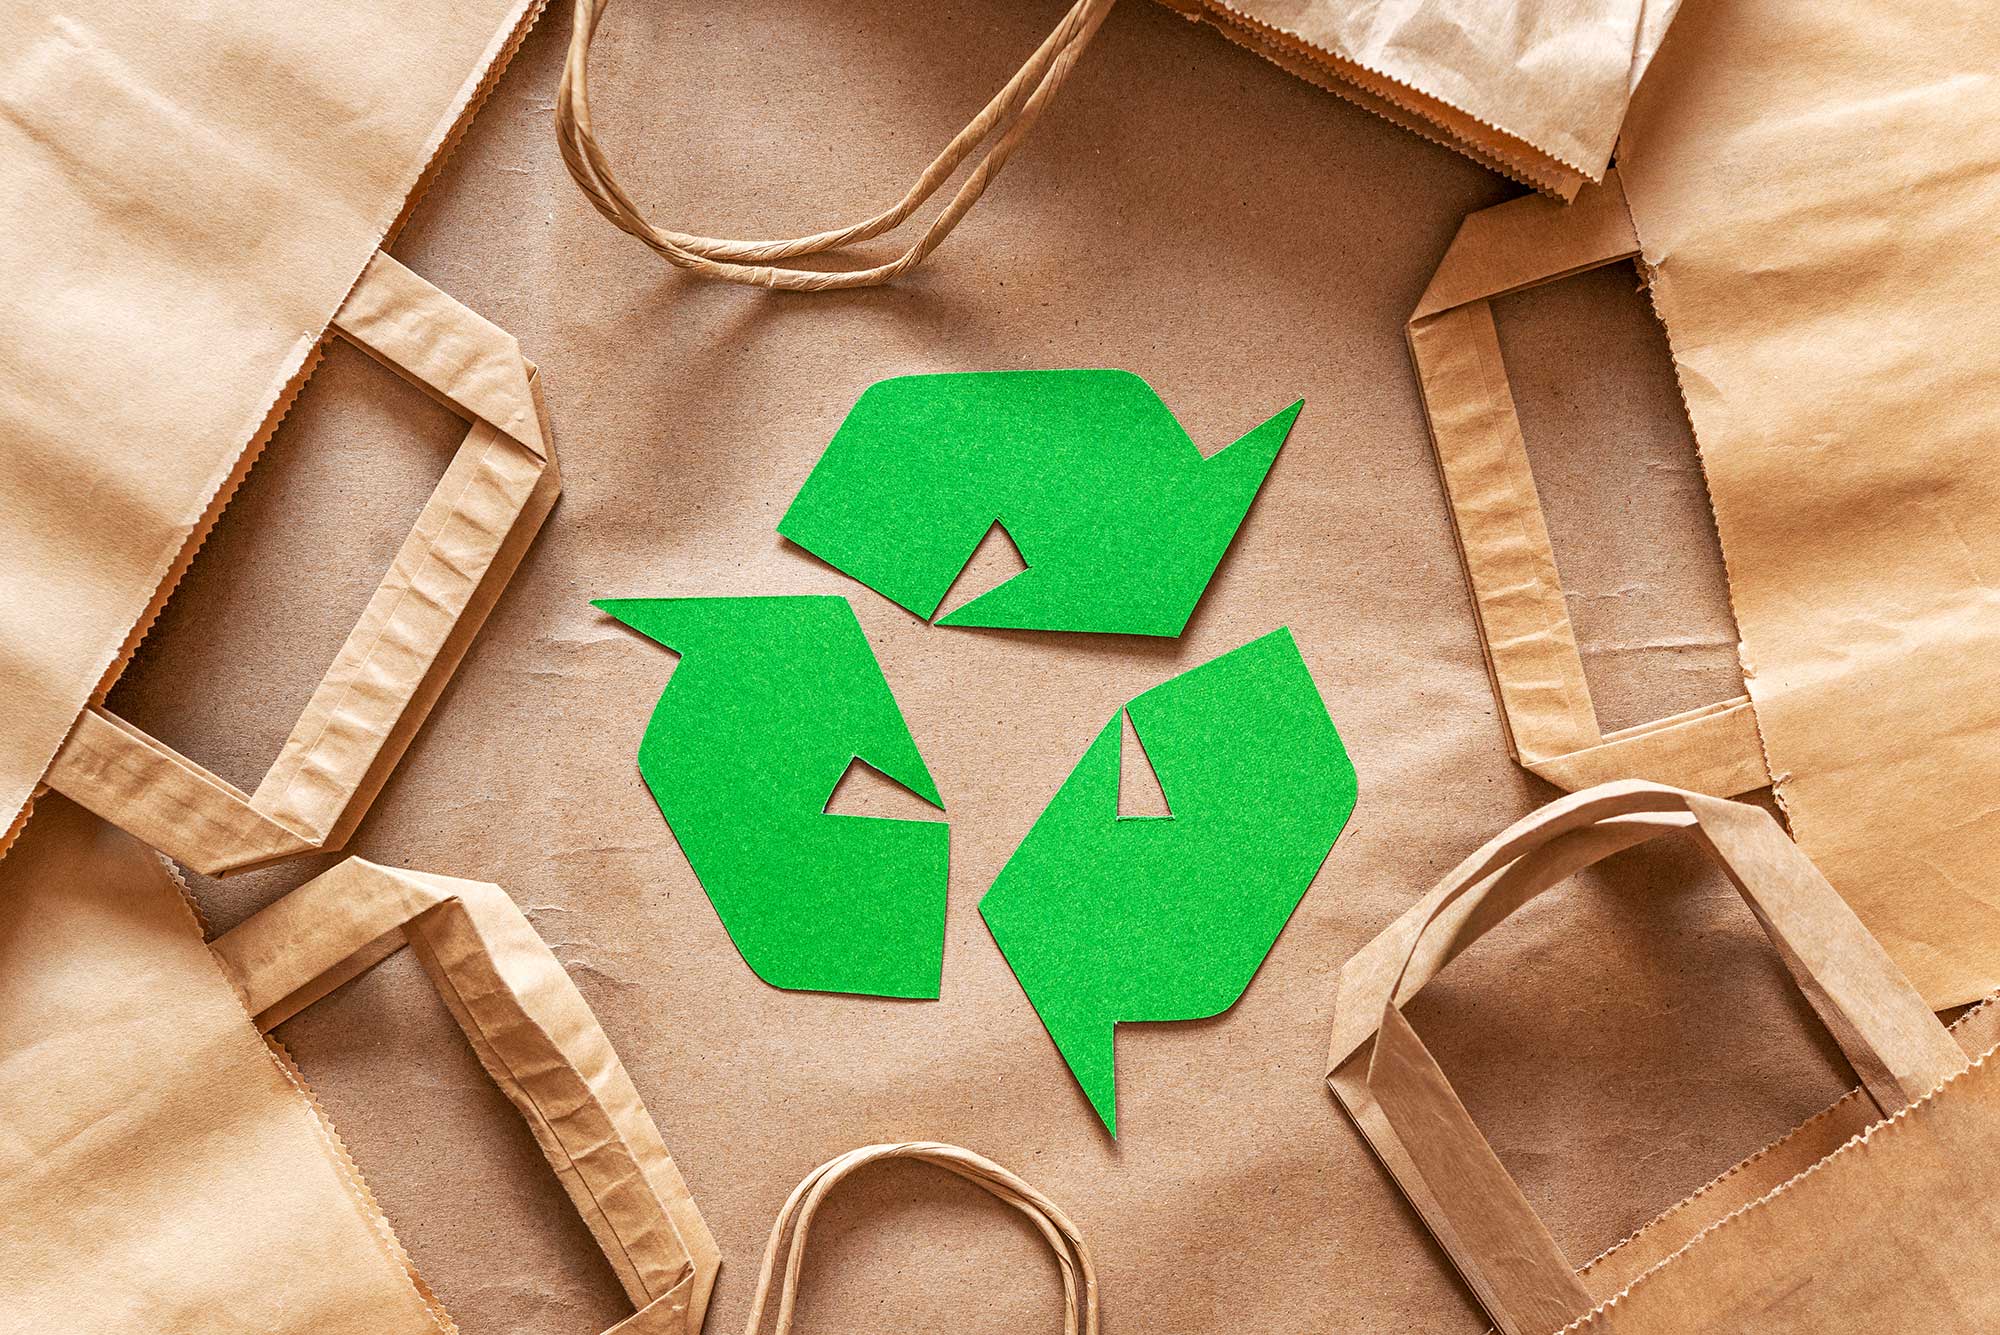 Recyclage carton emballage : comment faire ?